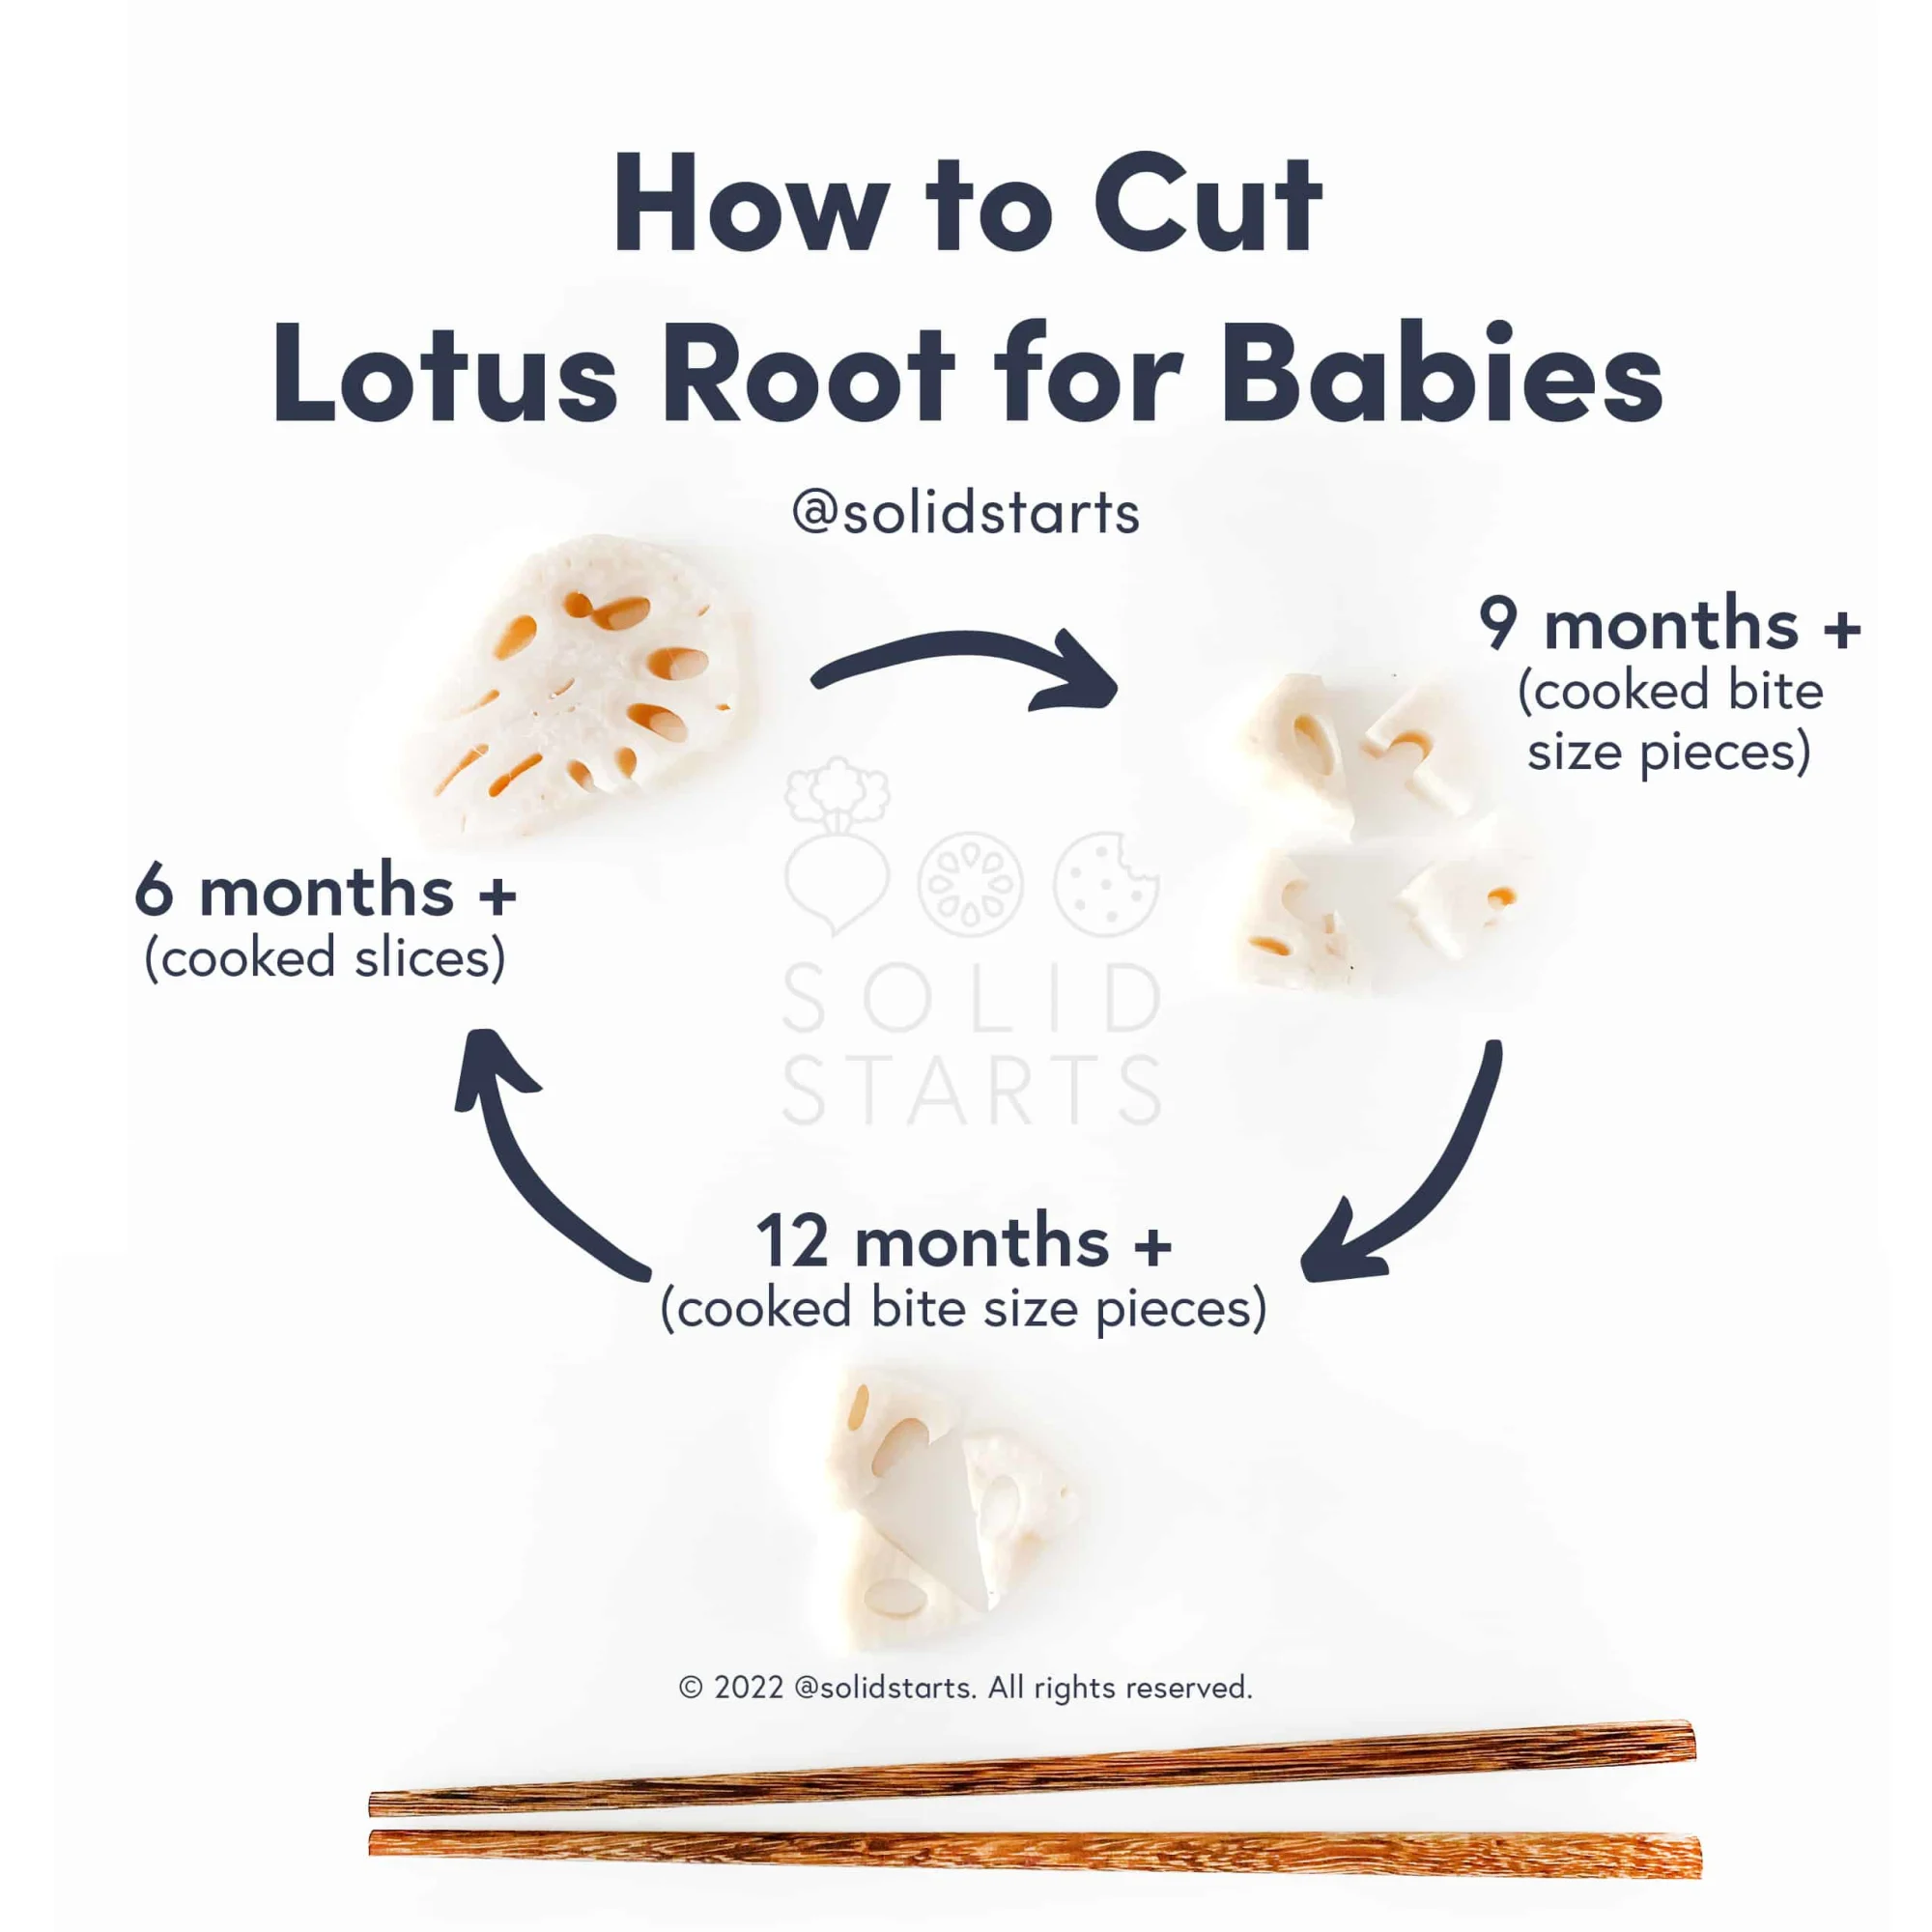 a Solid Starts infographic with the header "How to Cut Lotus Root for Babies": cooked thin slices for 6 months+, cooked bite-sized pieces for 9 months+, and cooked bite-sized pieces pictured next to chopsticks for 12 months+